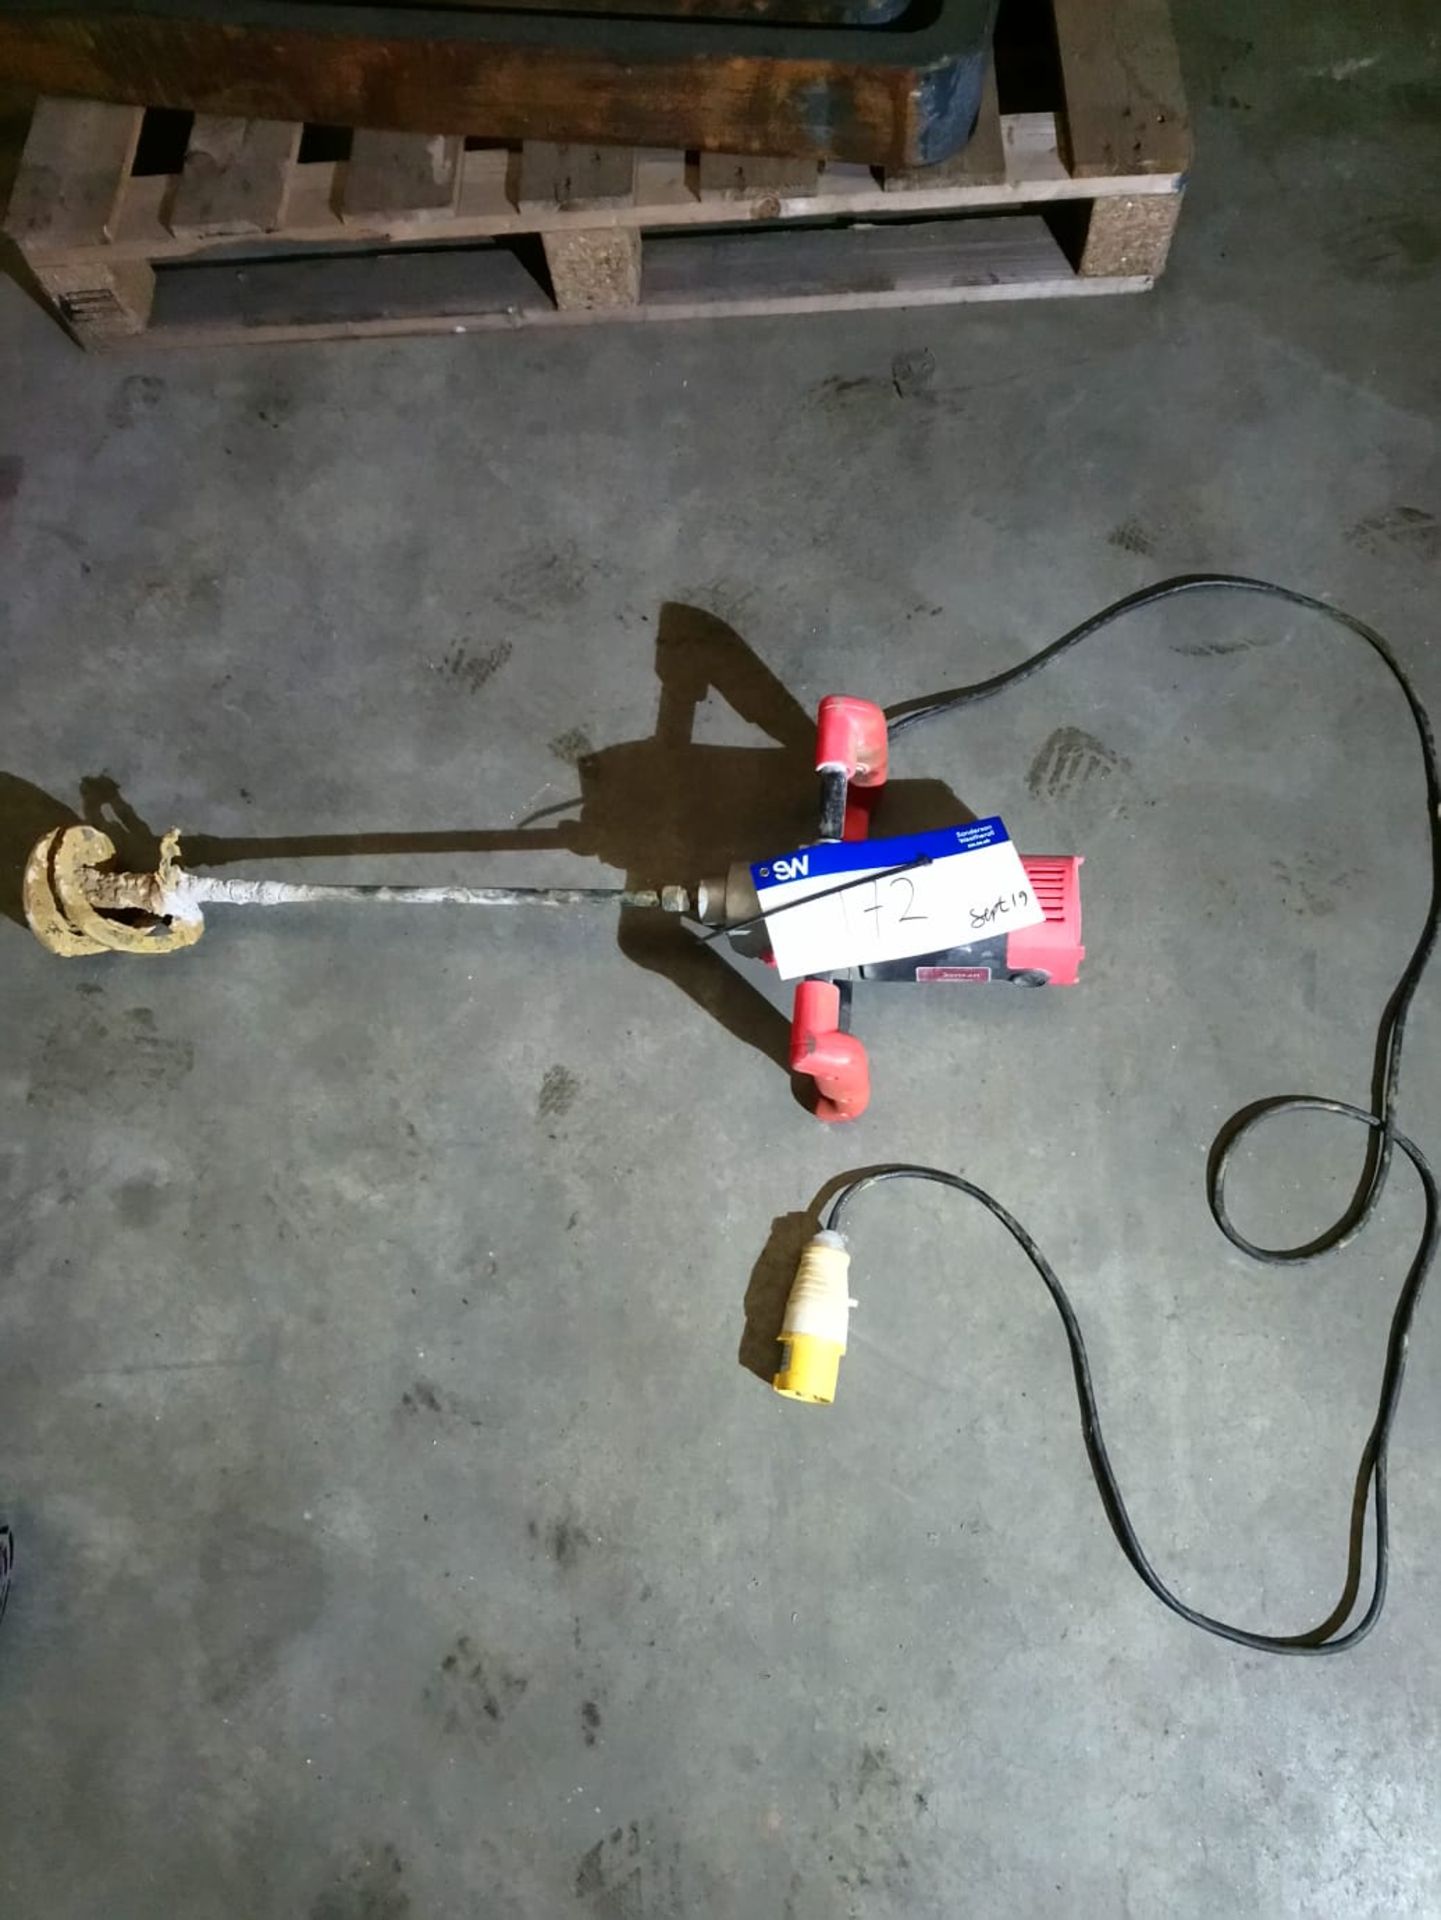 Plaster Mixer, 110V, lift out charge - £5